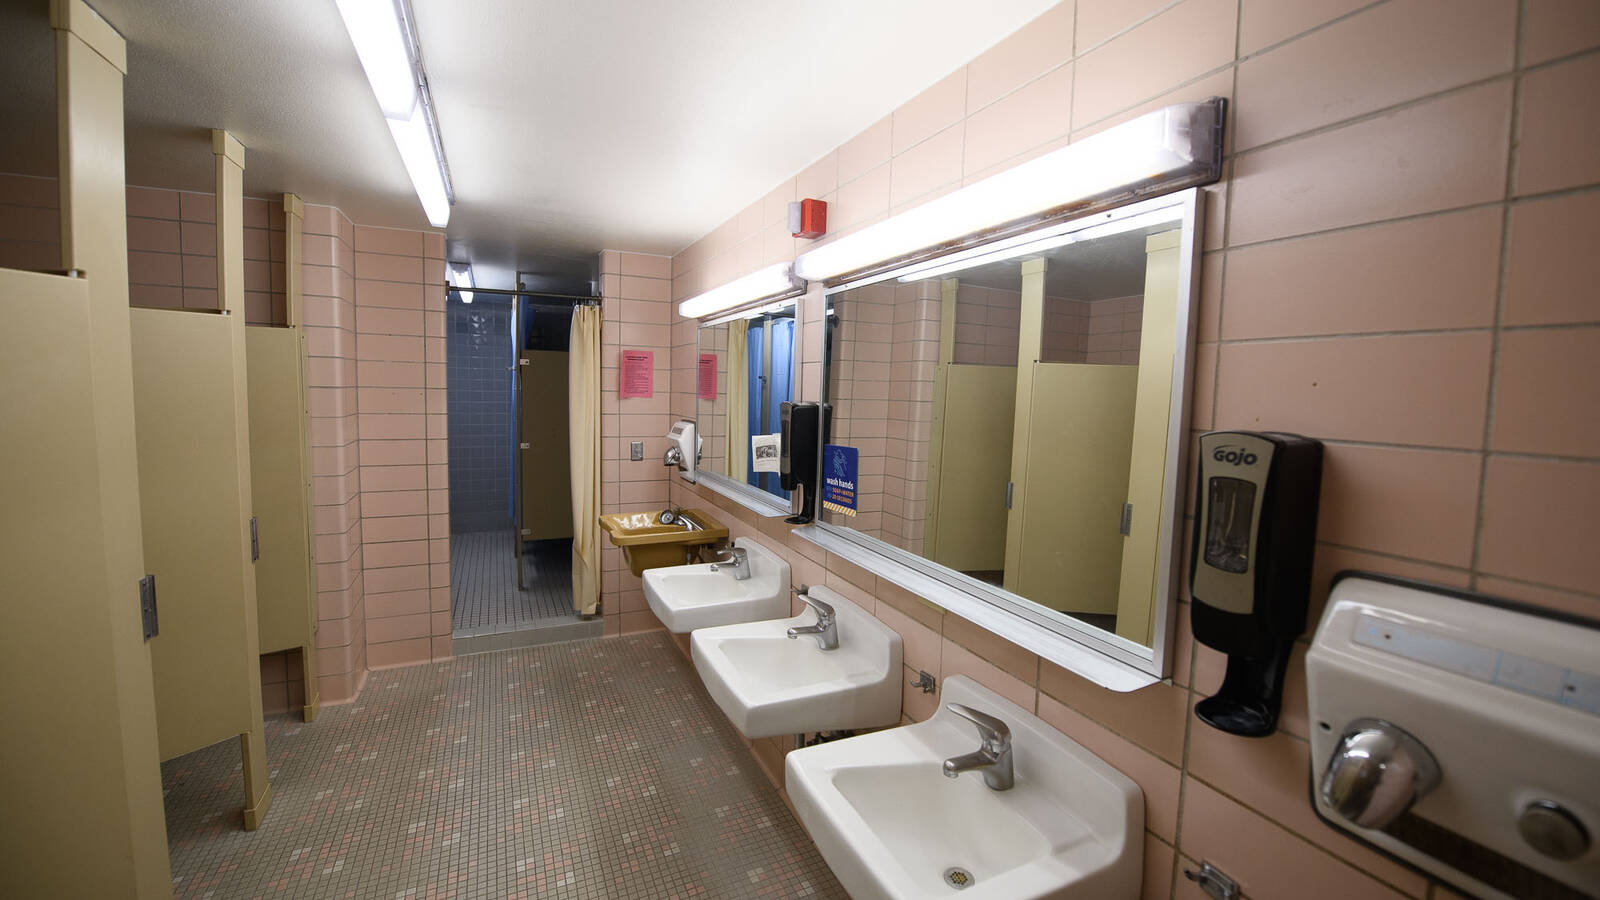 A bathroom in Sutherland Hall, featuring four sinks, mirrors and multiple restroom and shower stalls